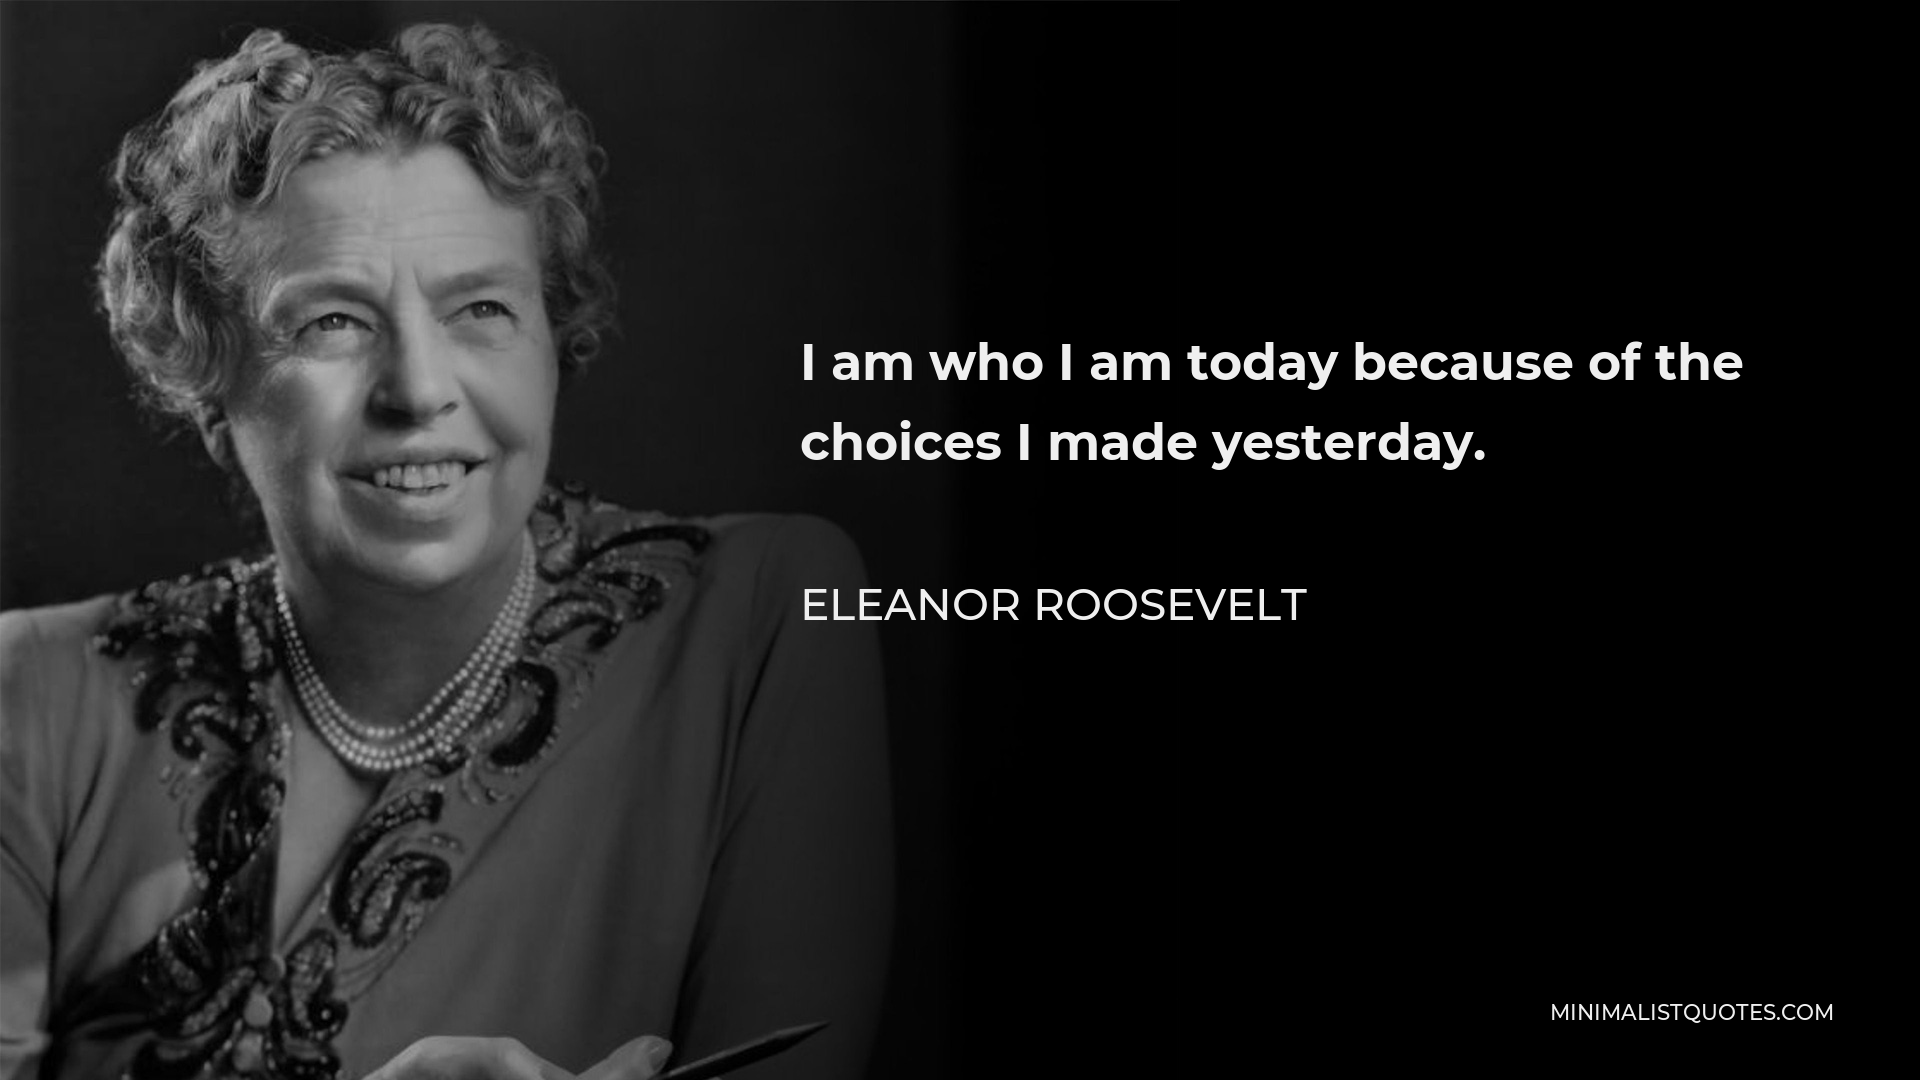 Eleanor Roosevelt Quote - I am who I am today because of the choices I made yesterday.